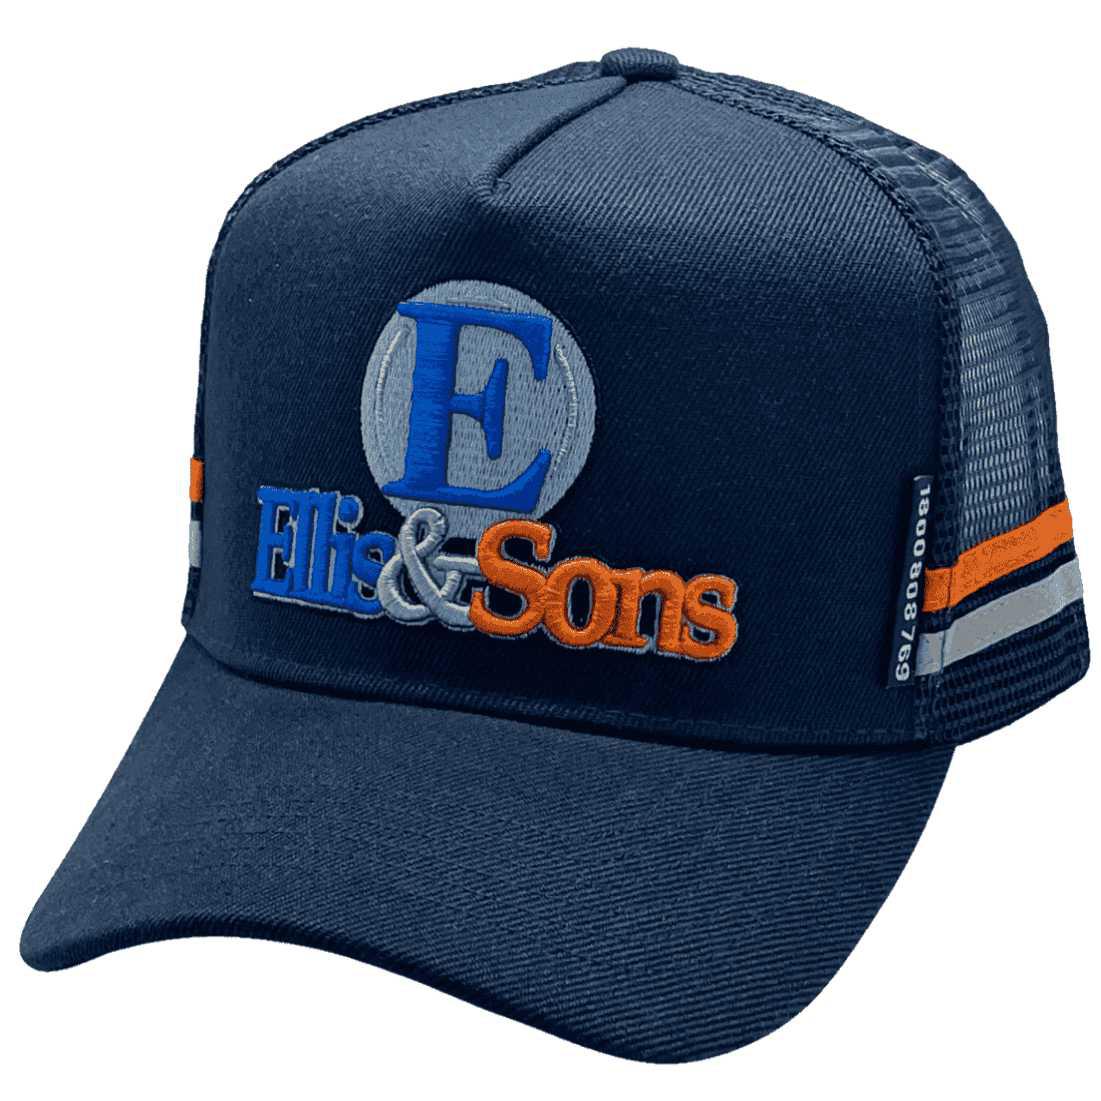 Ellis Sons Cowra NSW HP Midrange Aussie Trucker Hats with Australian Head Fit Crown and 2 Side Bands